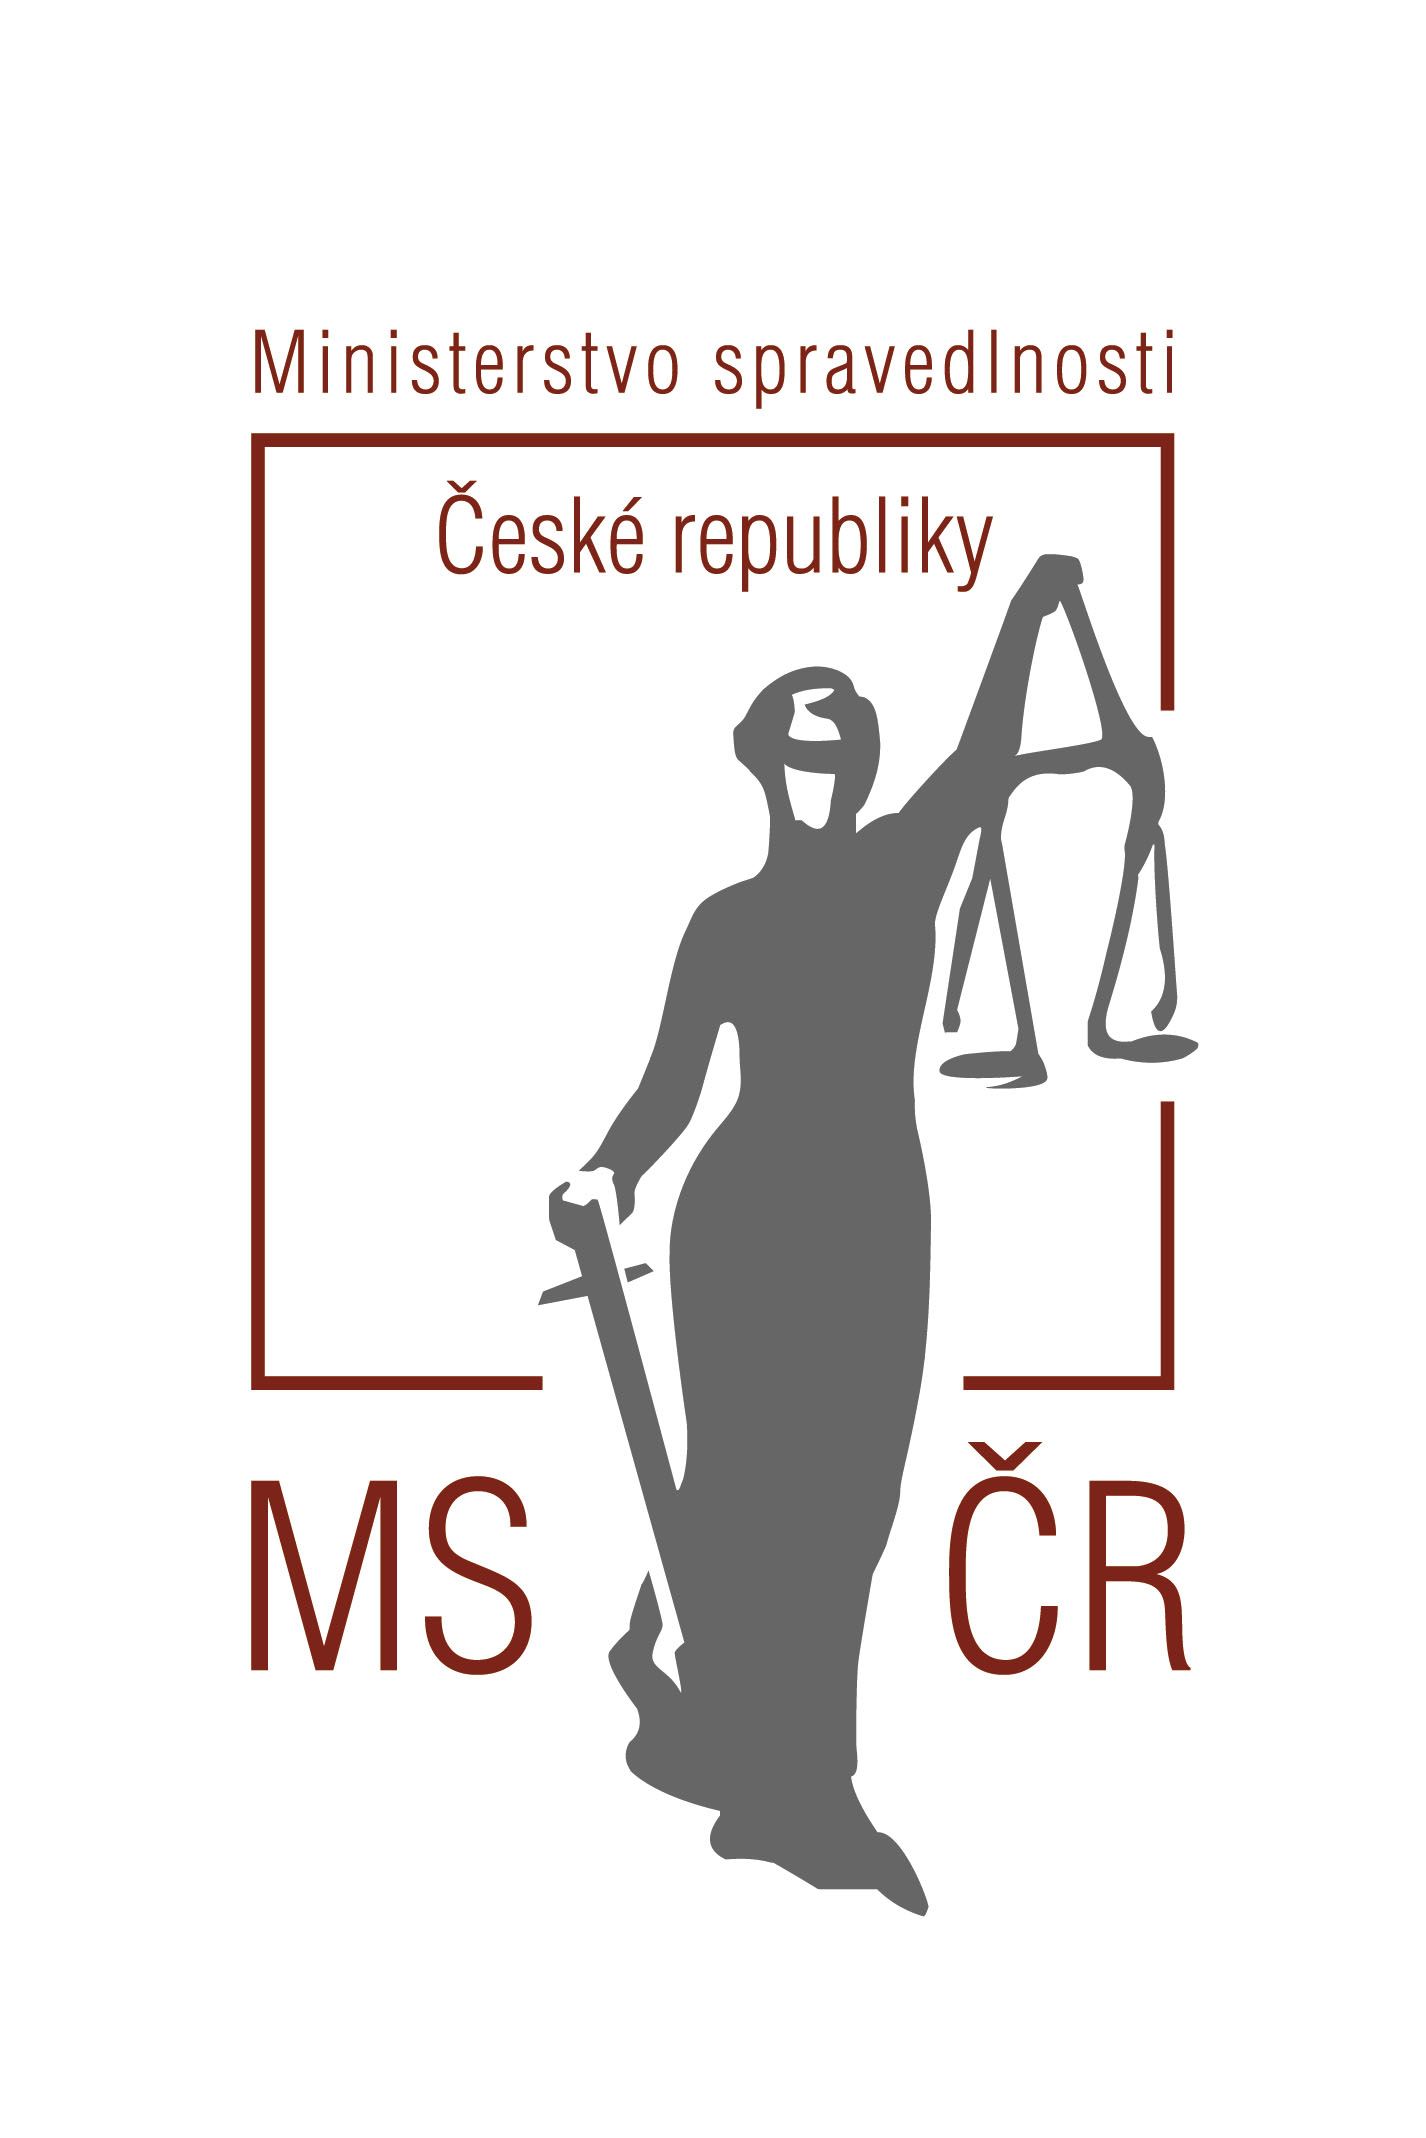 Czech Ministry of Justice